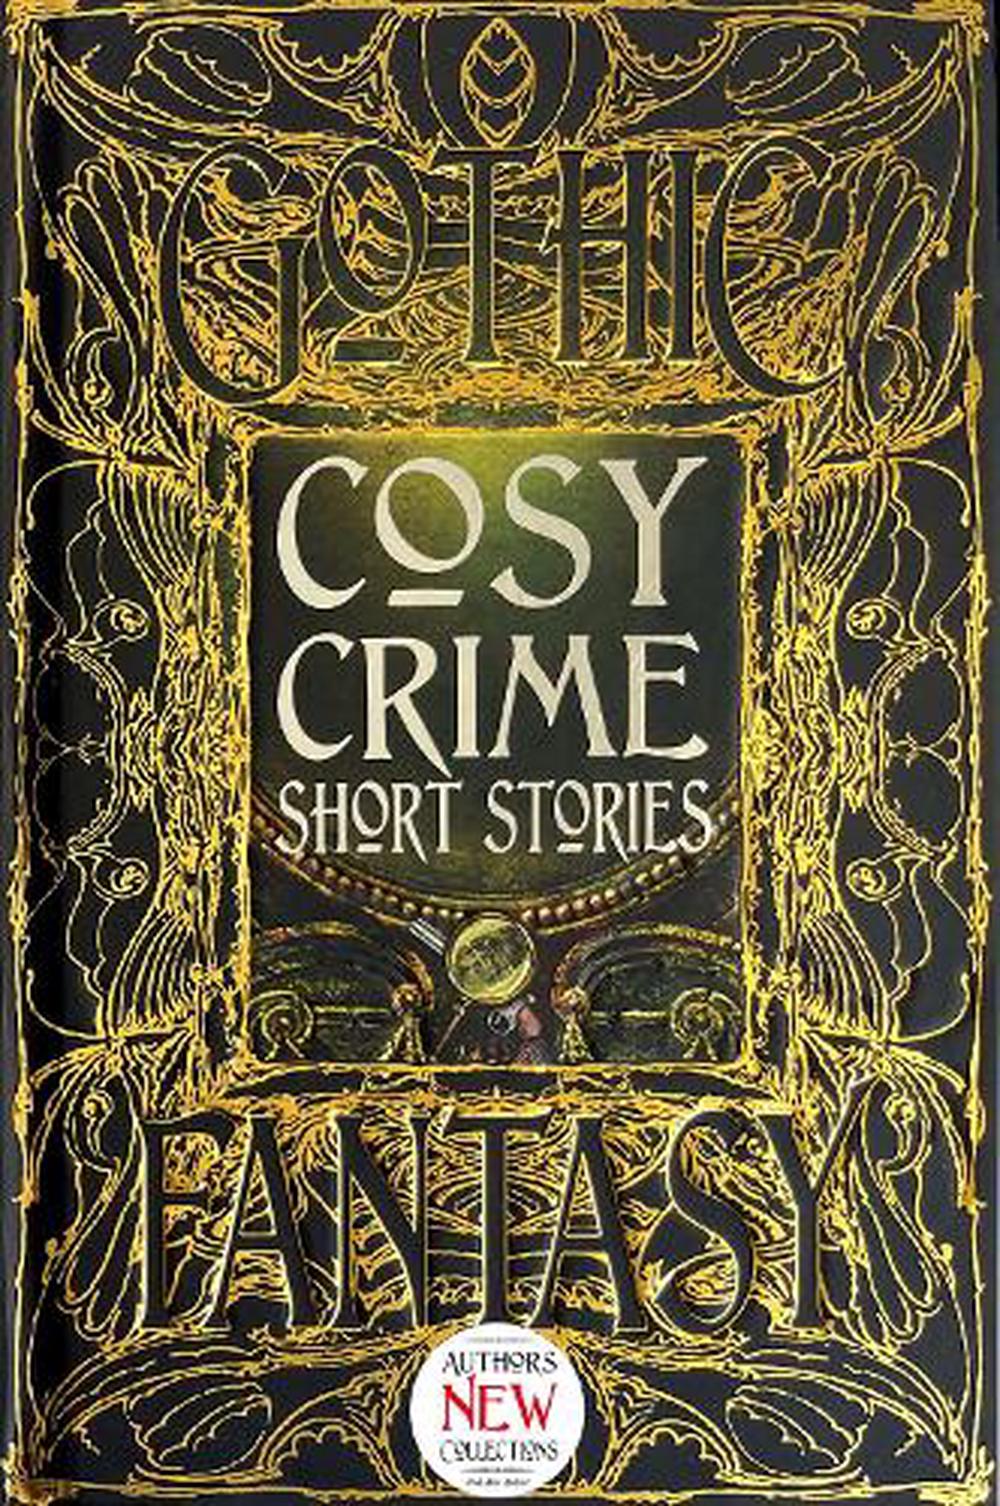 Cosy Crime Short Stories English Hardcover Book Free Shipping